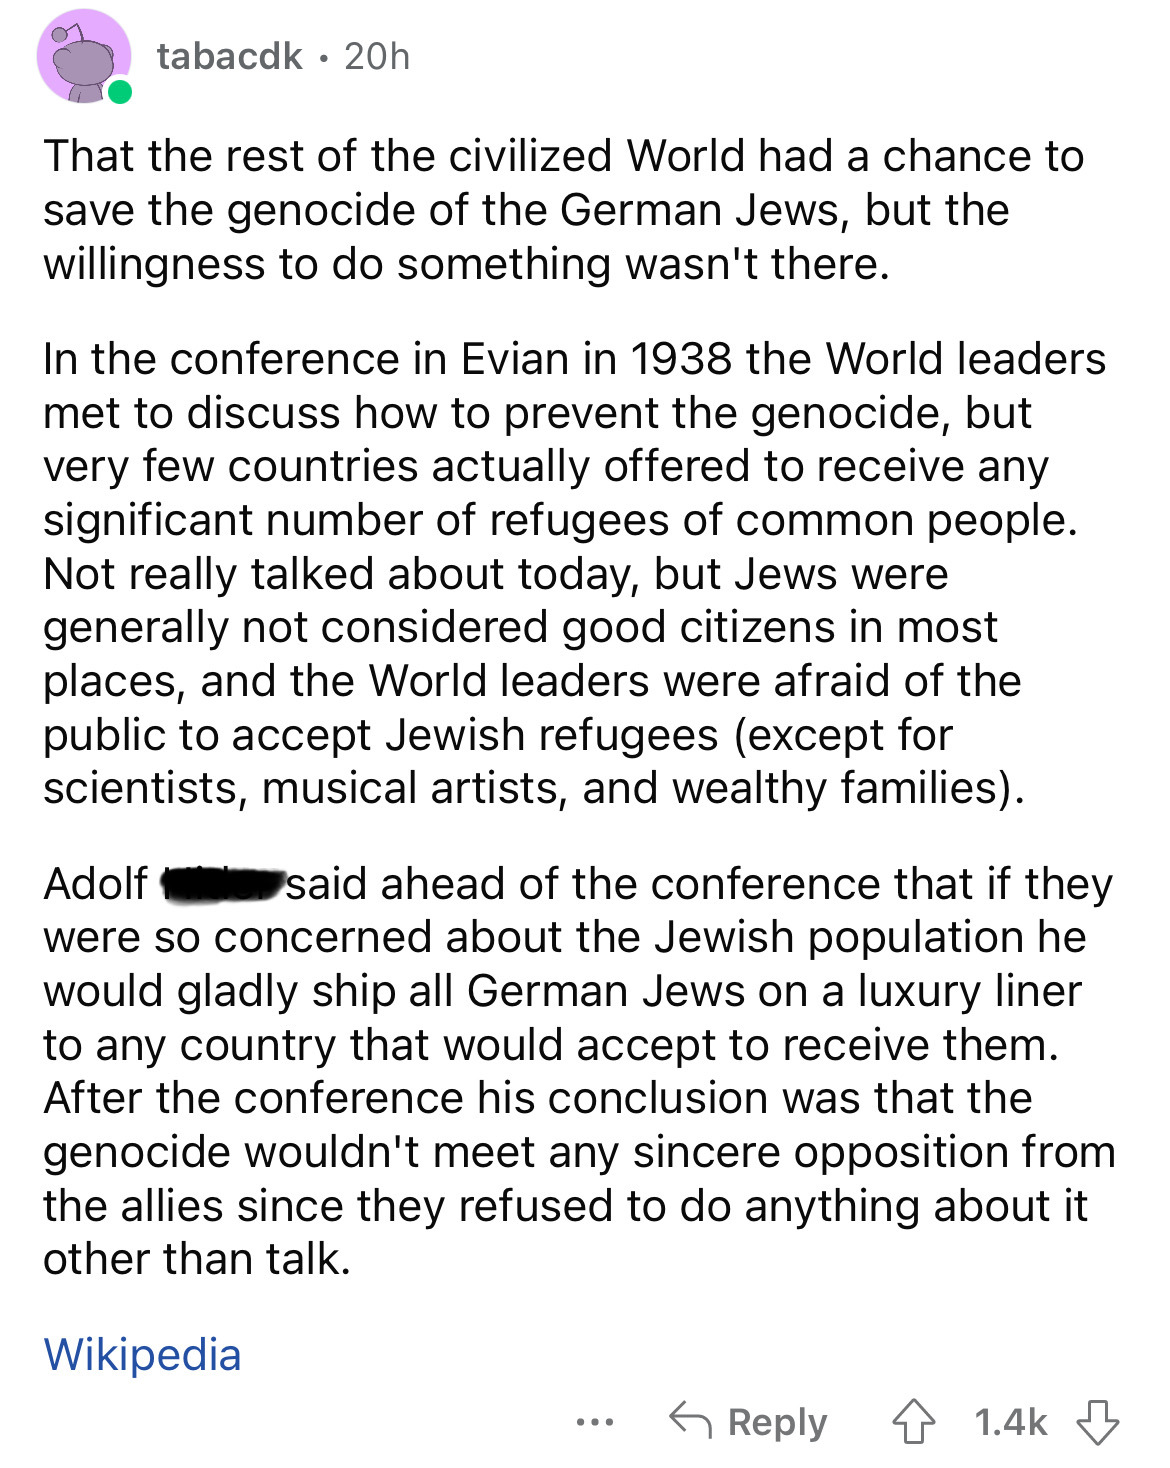 document - tabacdk 20h That the rest of the civilized World had a chance to save the genocide of the German Jews, but the willingness to do something wasn't there. In the conference in Evian in 1938 the World leaders met to discuss how to prevent the geno